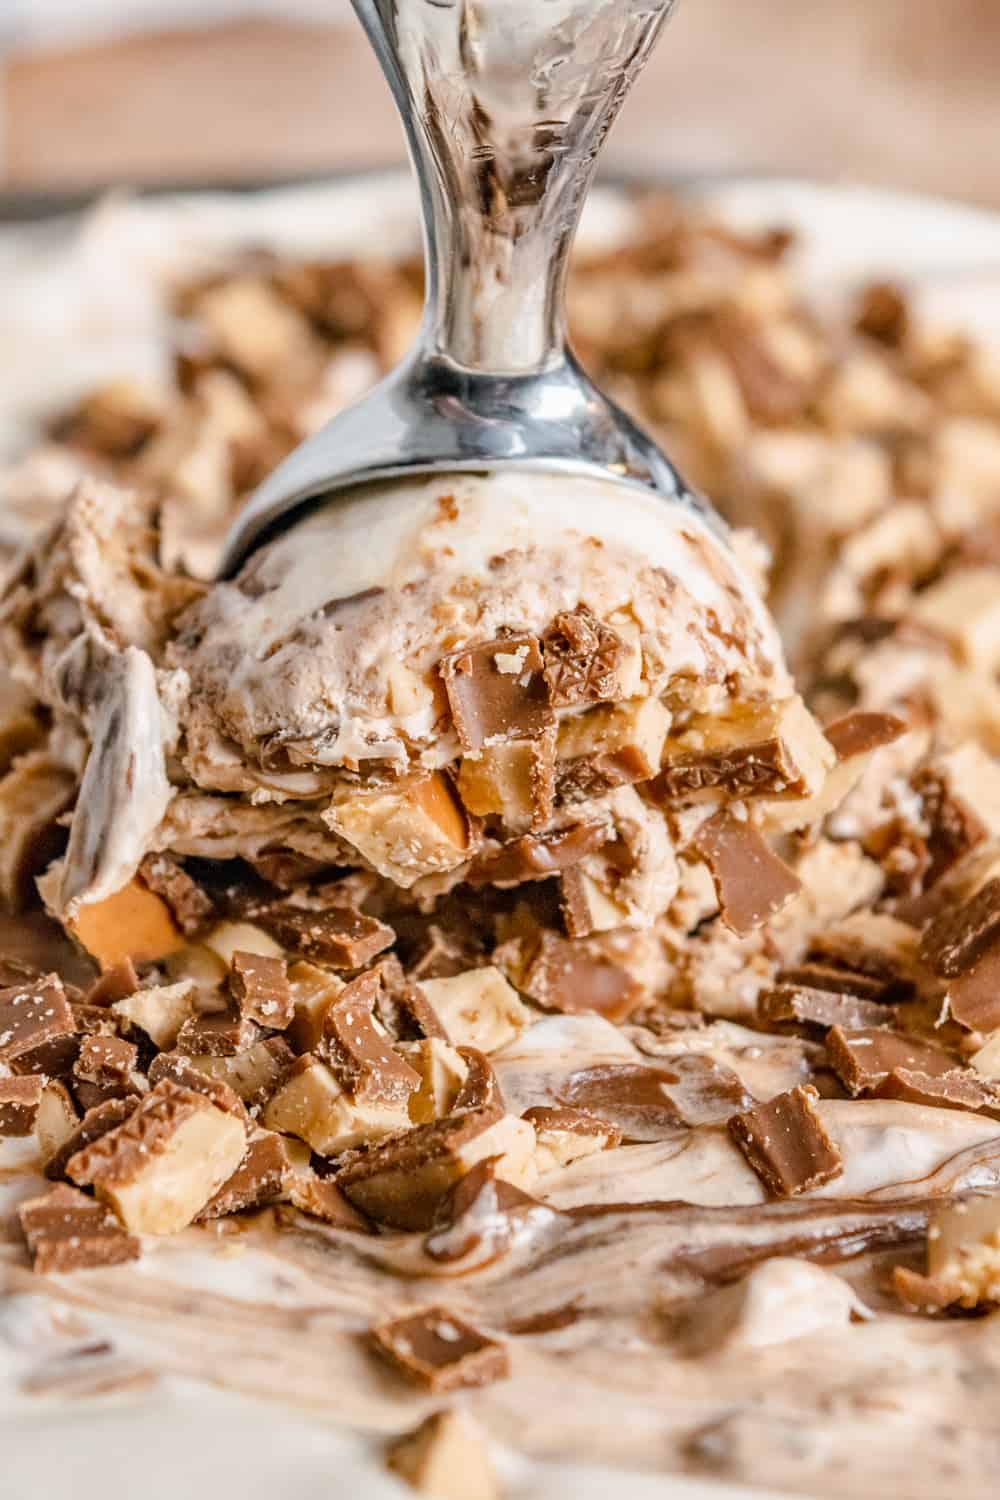 Closeup of a scoop in a container of Toffee Nutella Ice Cream covered in Heath bits.